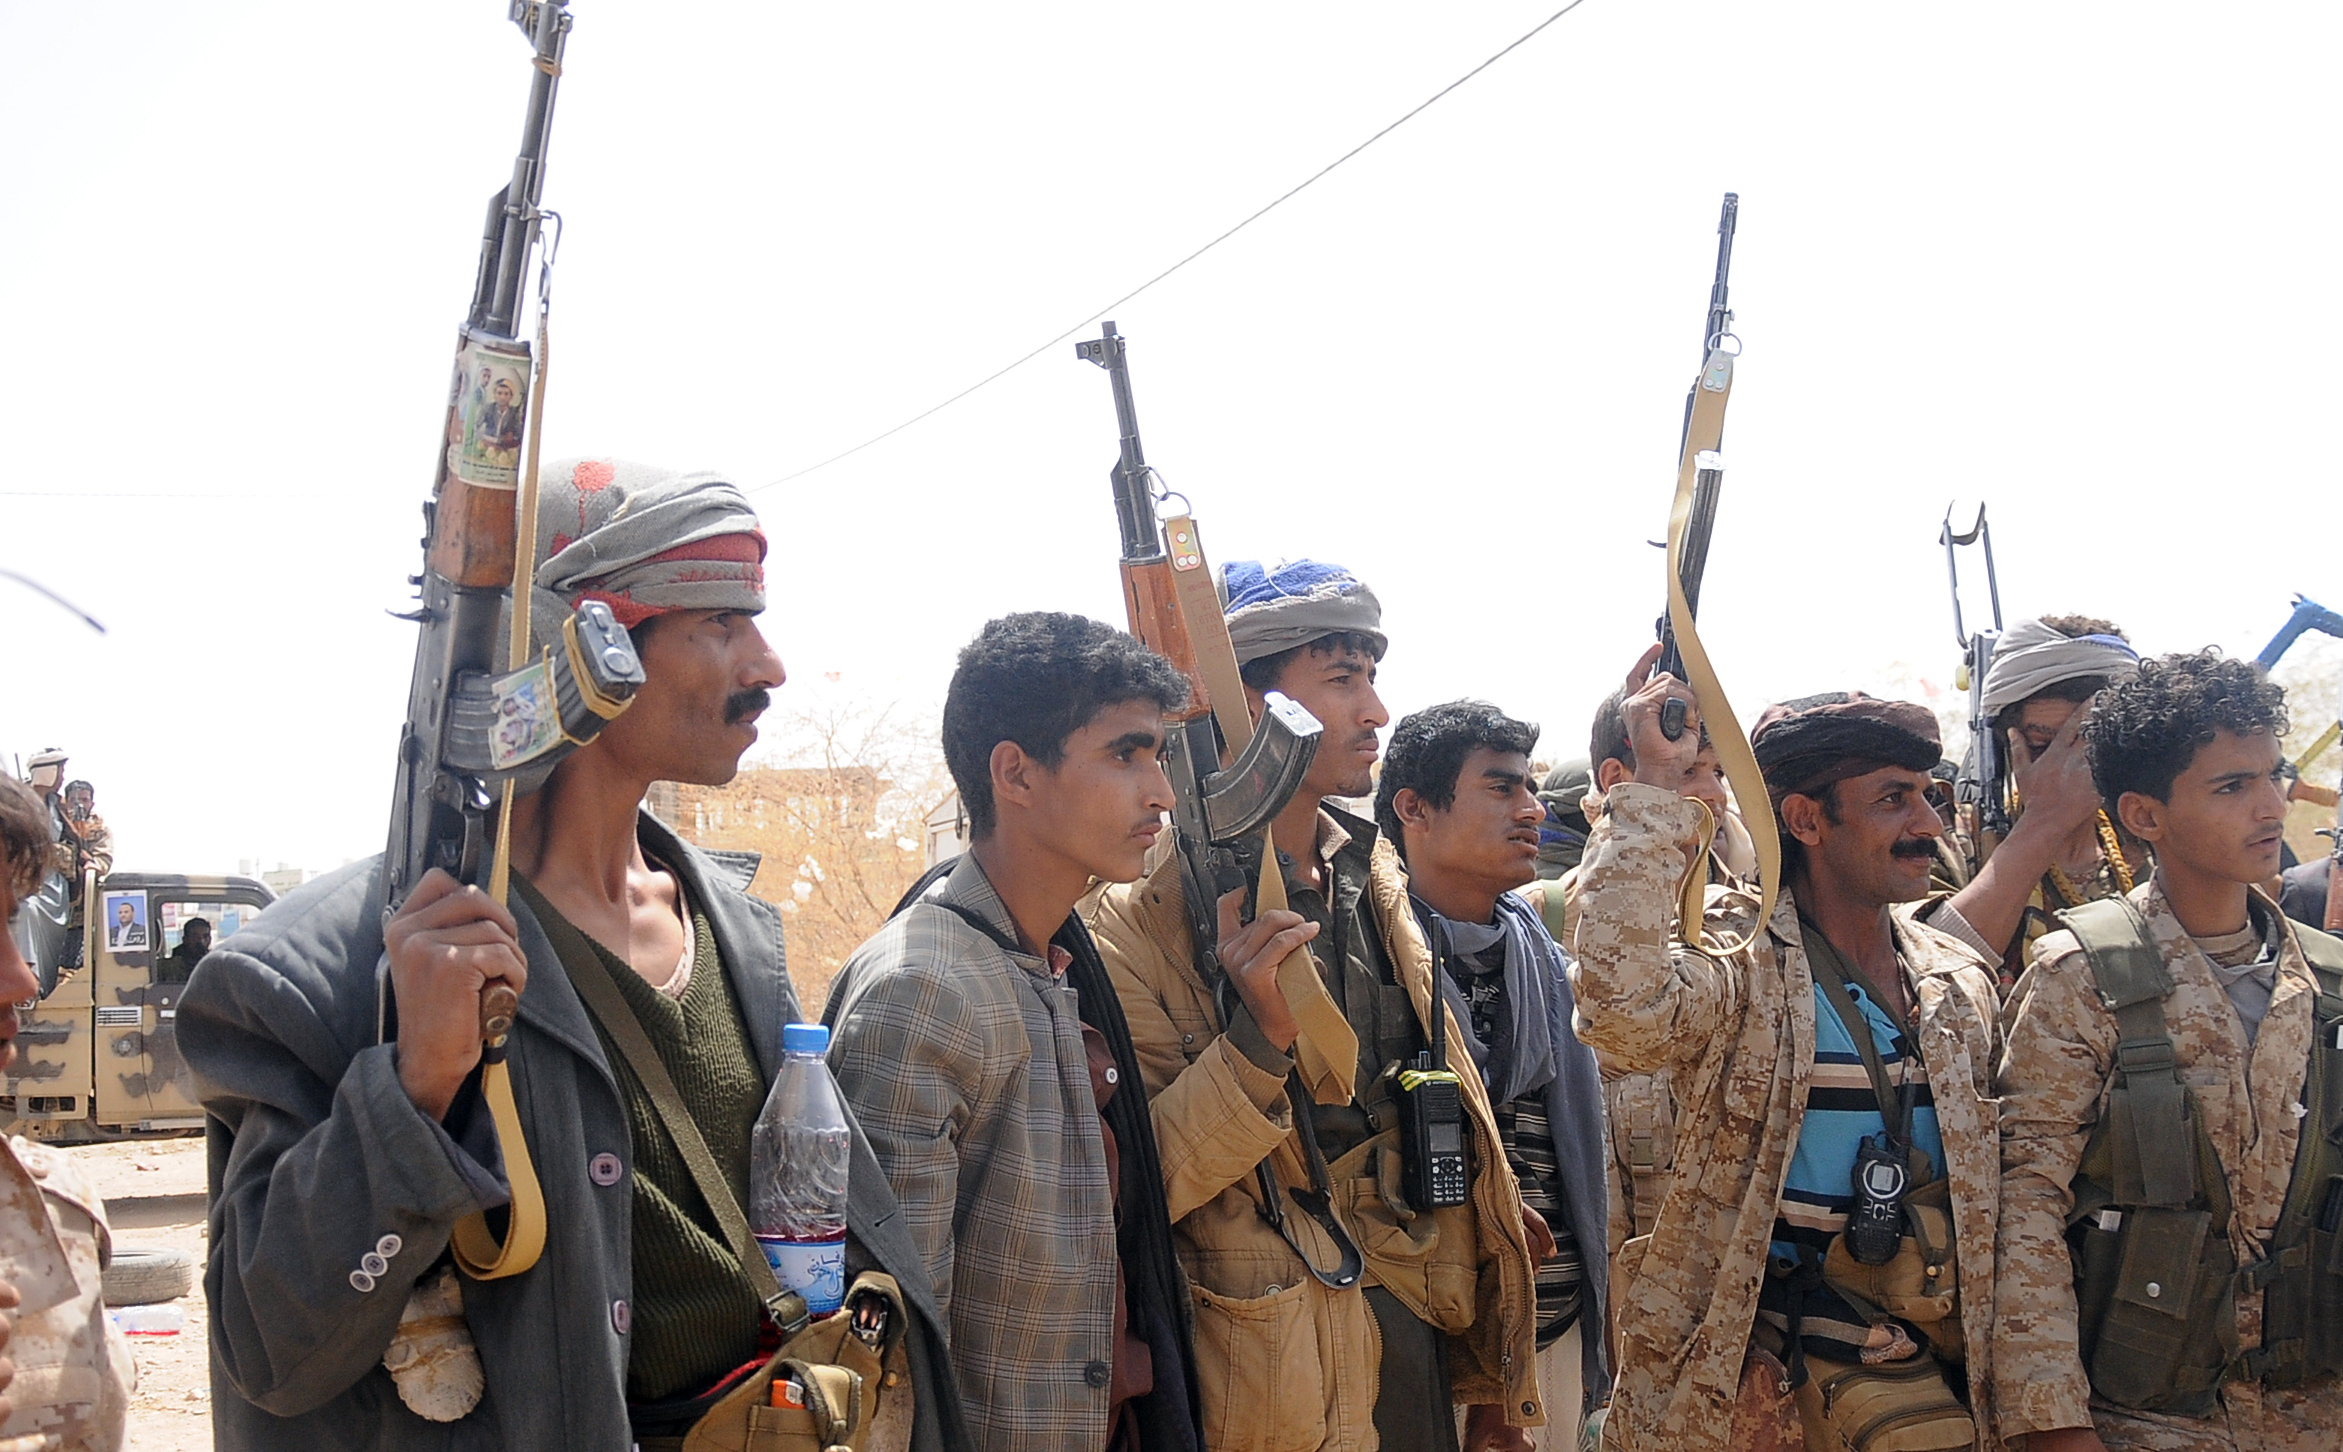 PHOTO: Houthi fighters gather at a recently captured area following heavy fighting with forces loyal to the internationally recognized government on March 2, 2020, in Al-Jawf province, Yemen.